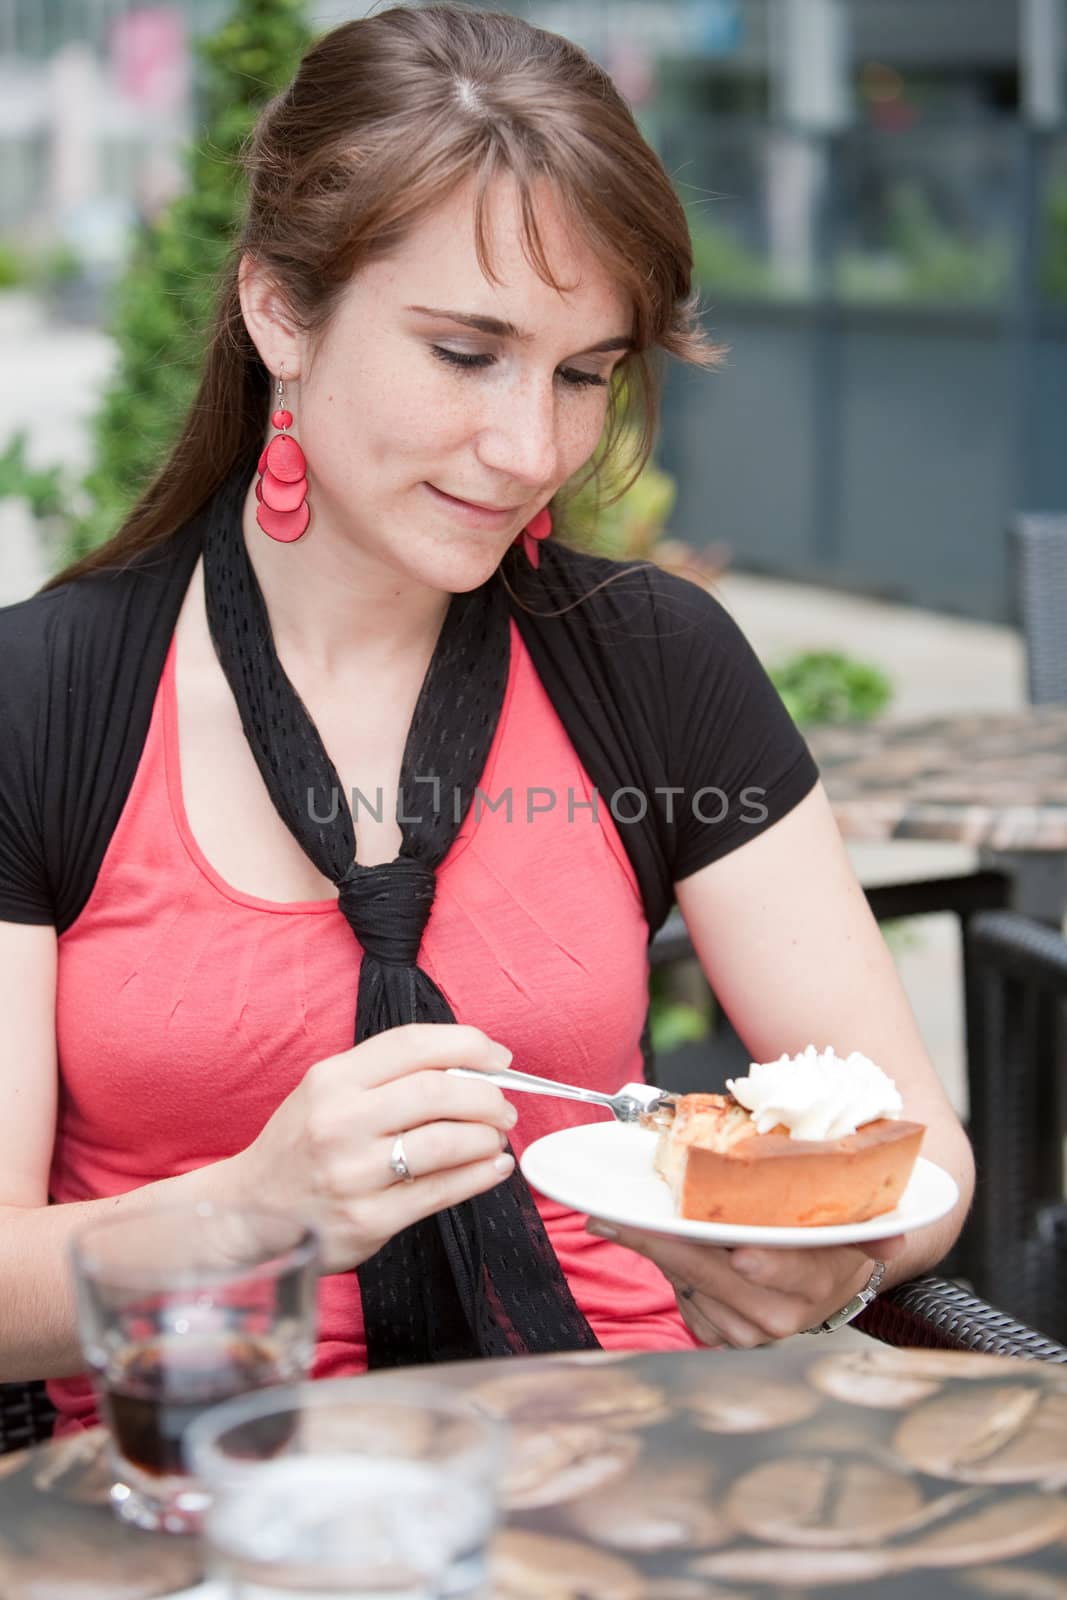 Attractive young woman having a piece of apple pie